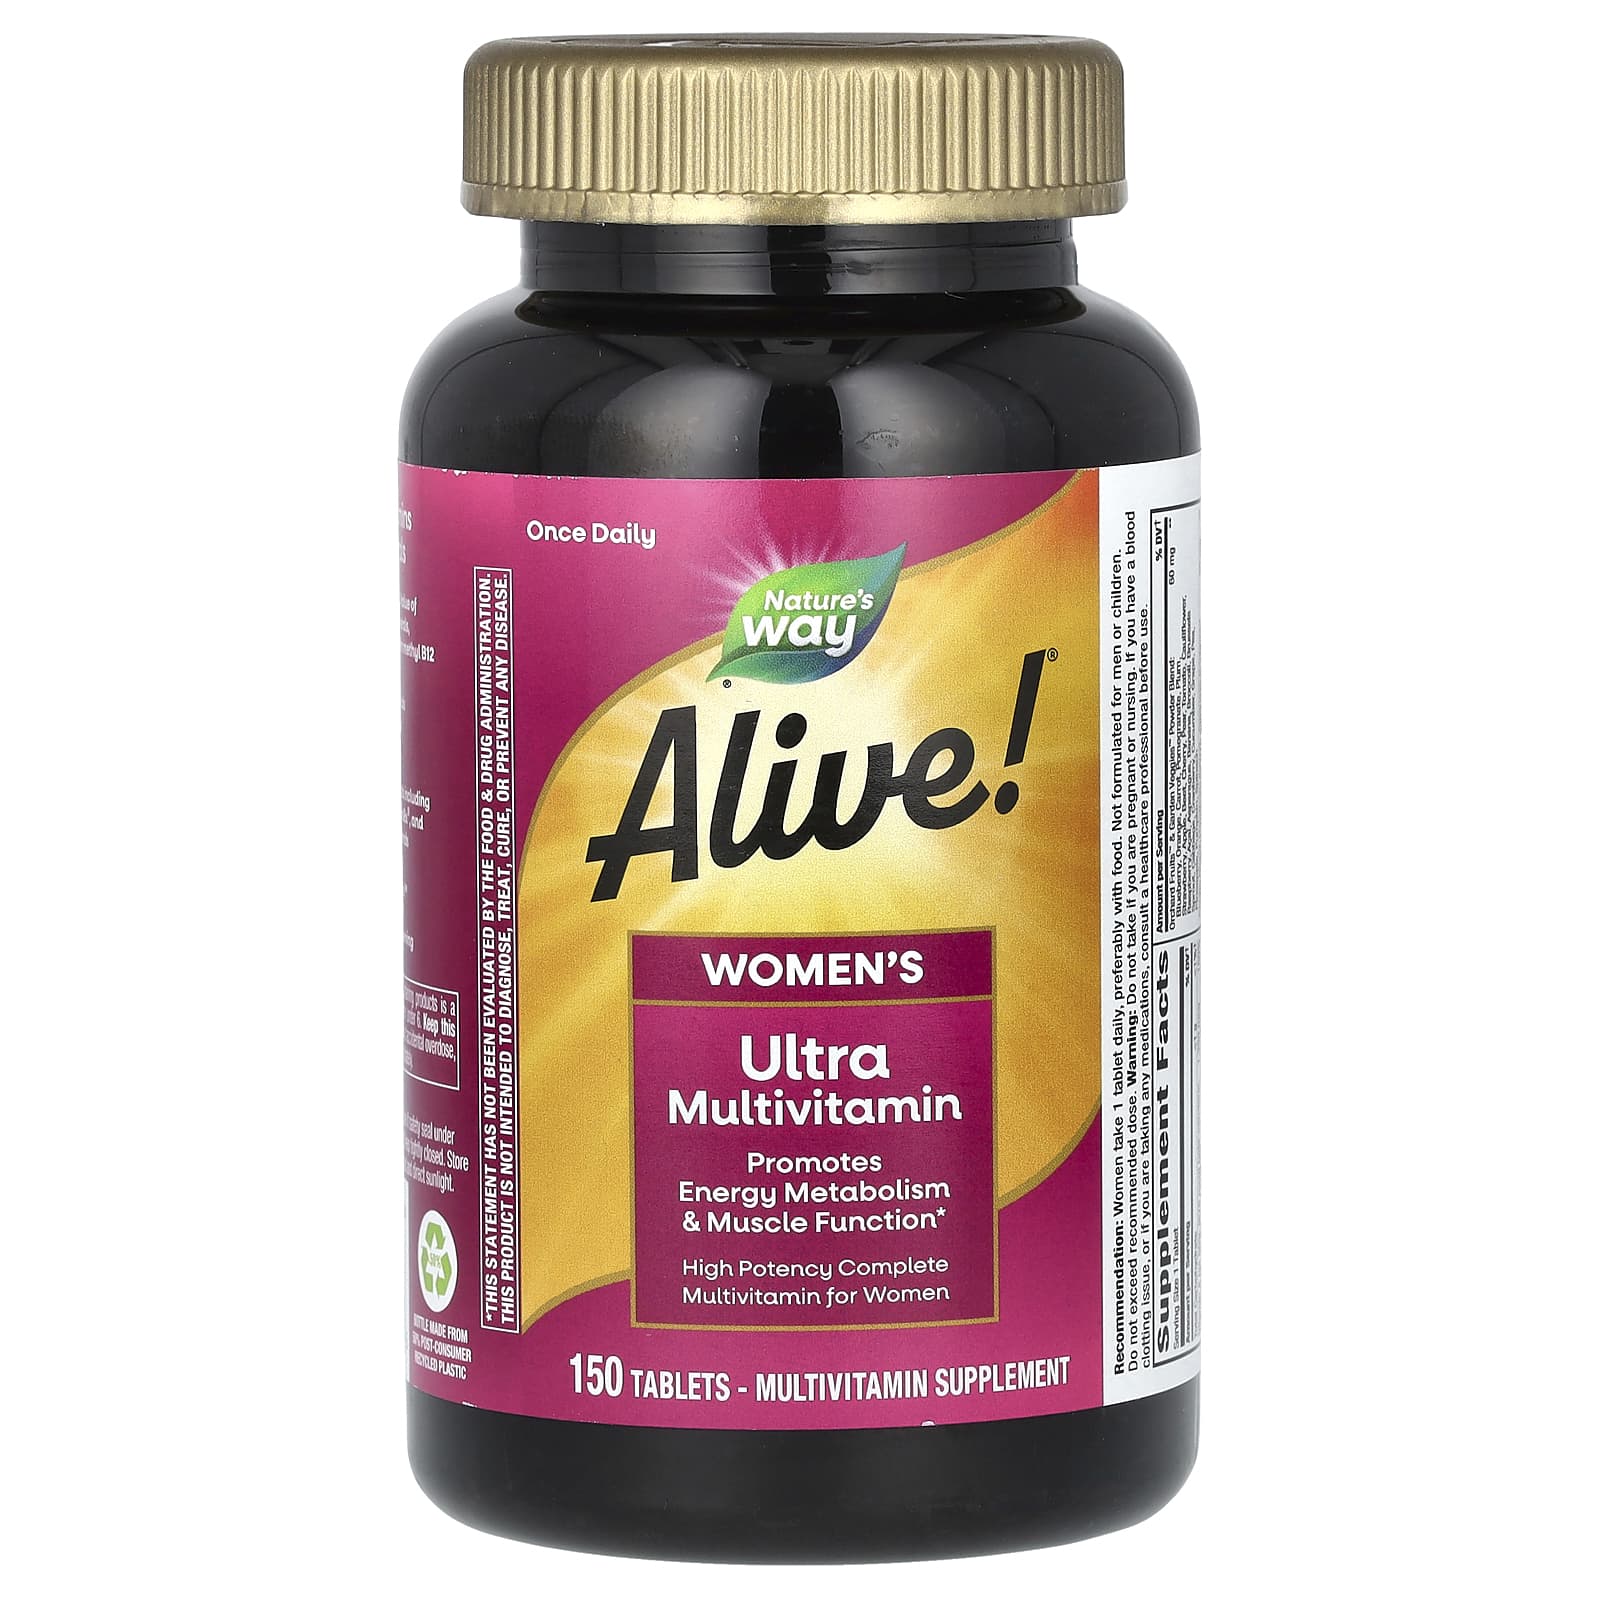 Nature's Way-Alive! Women's Ultra Multivitamin-150 Tablets